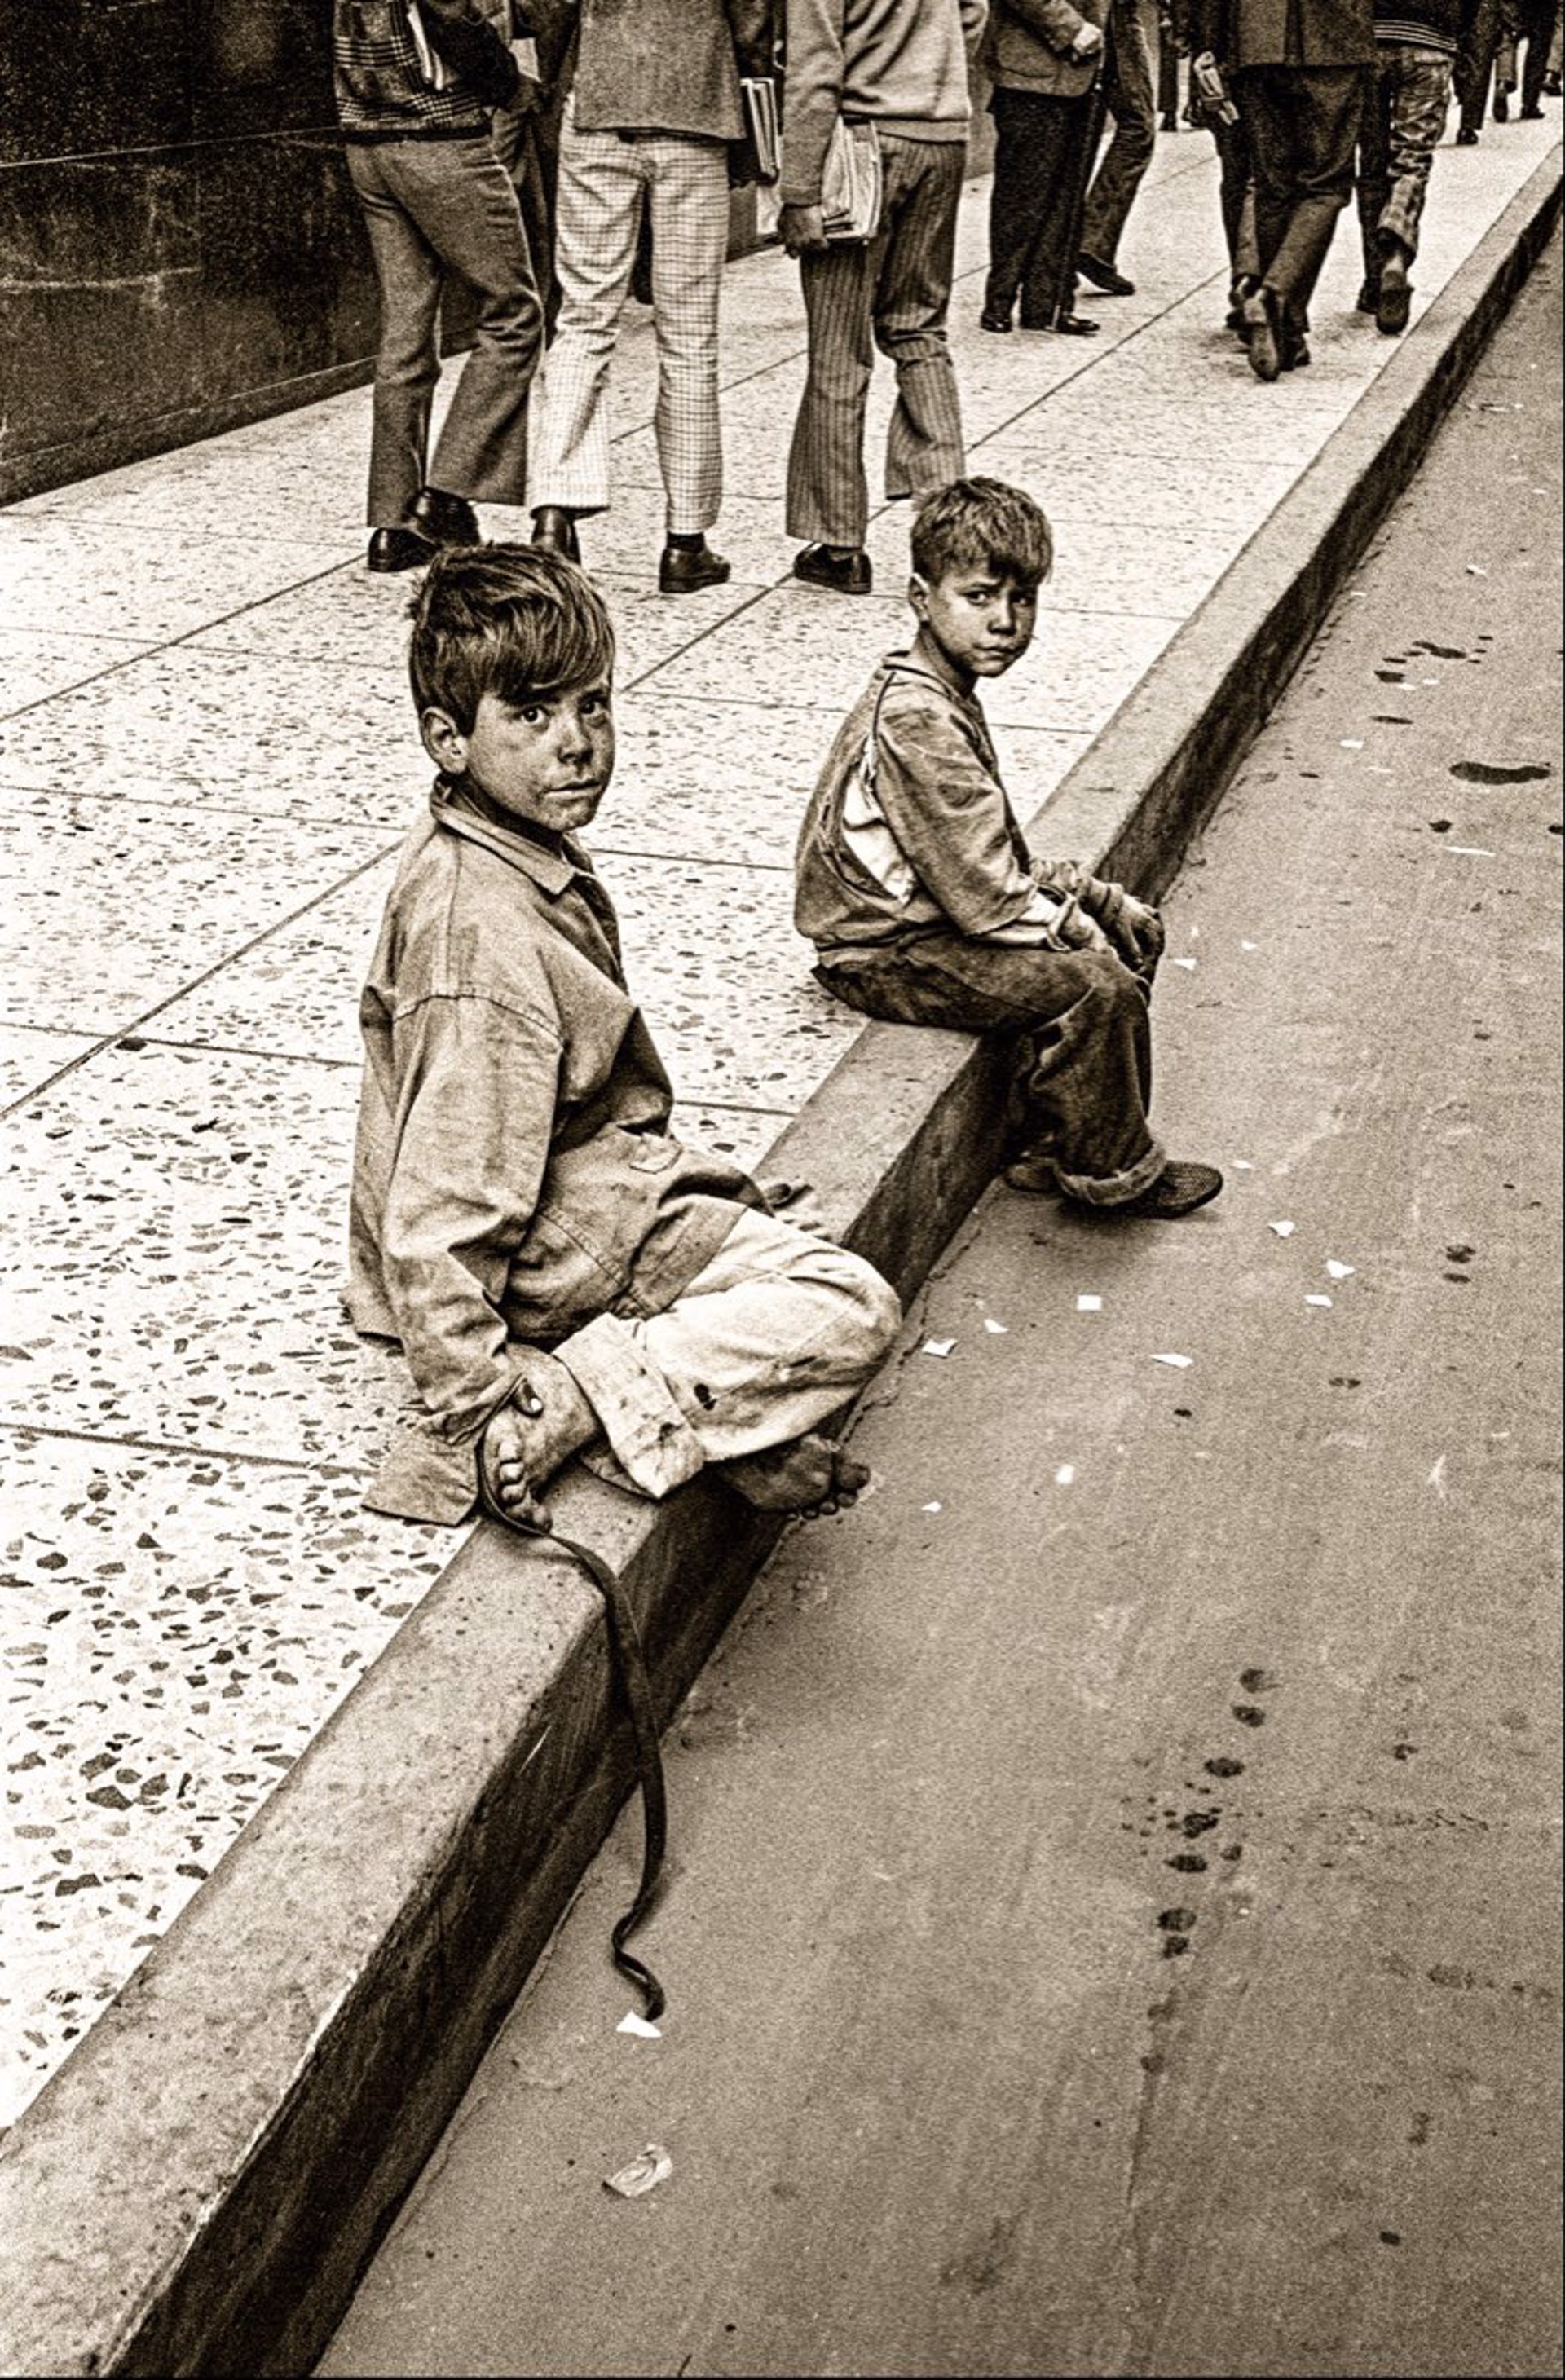 Two Kids on Curb, Unframed (003) by Jack Dempsey